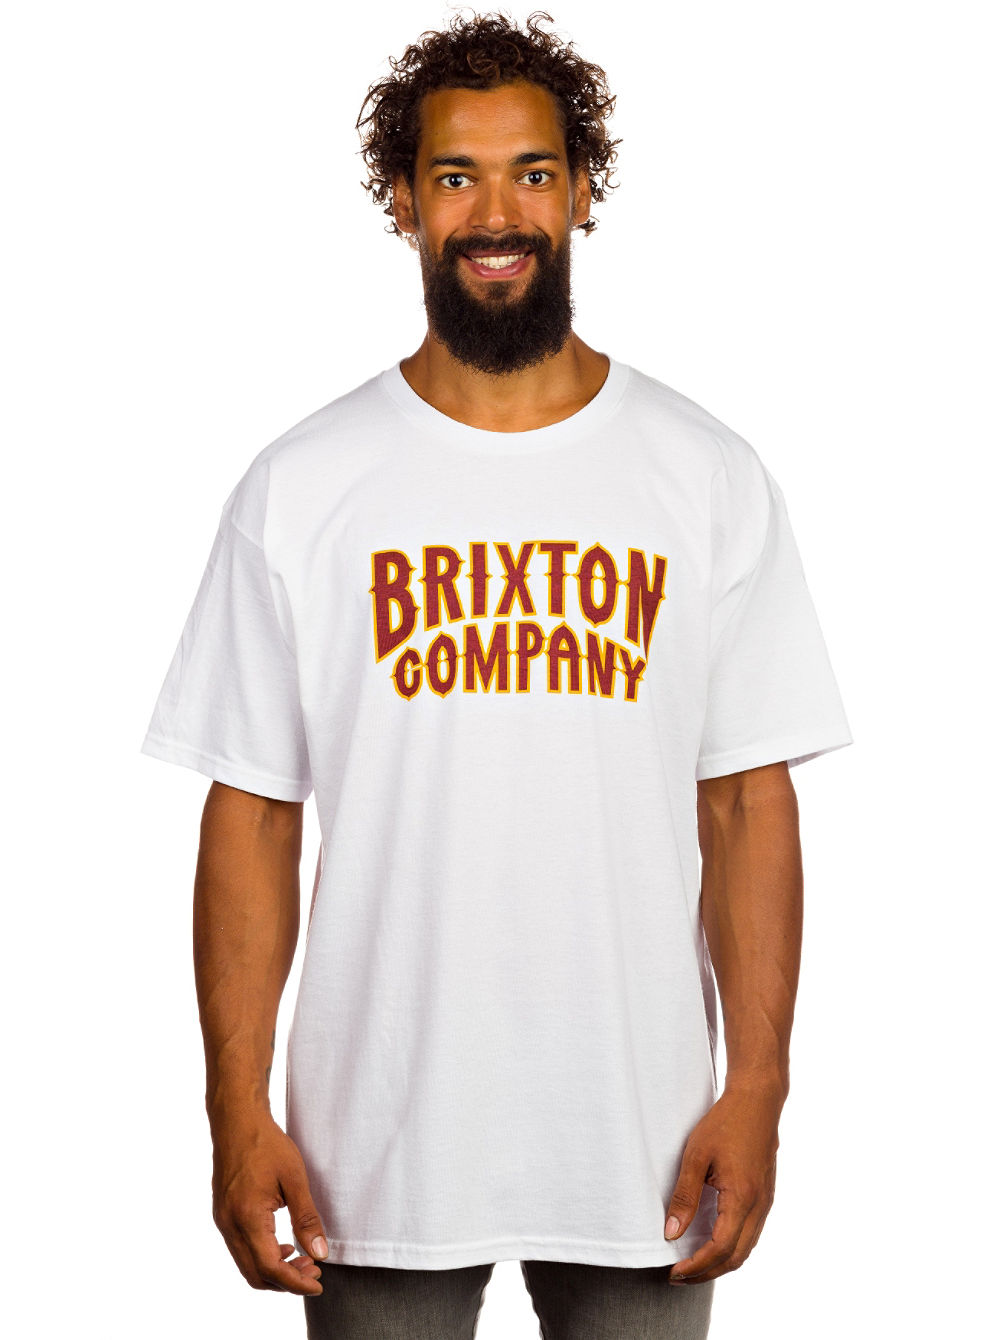 Buy Brixton Bailey T-Shirt online at blue-tomato.com